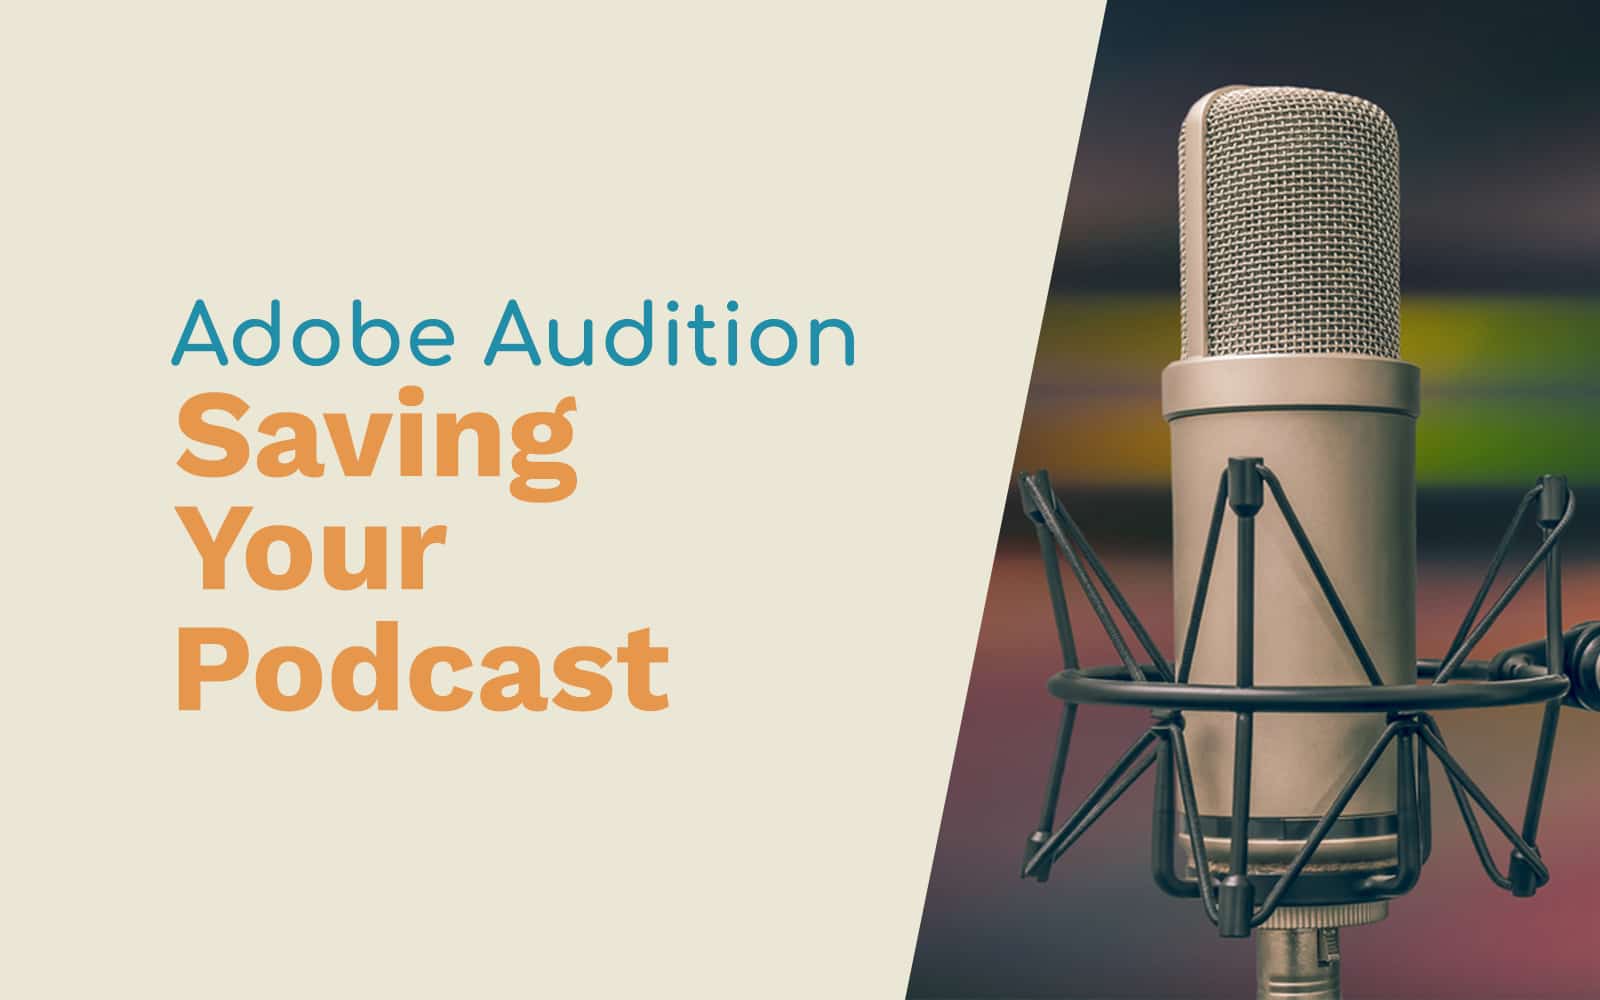 Saving Your Podcast in Adobe Audition Podcasting saving your podcast Music Radio Creative